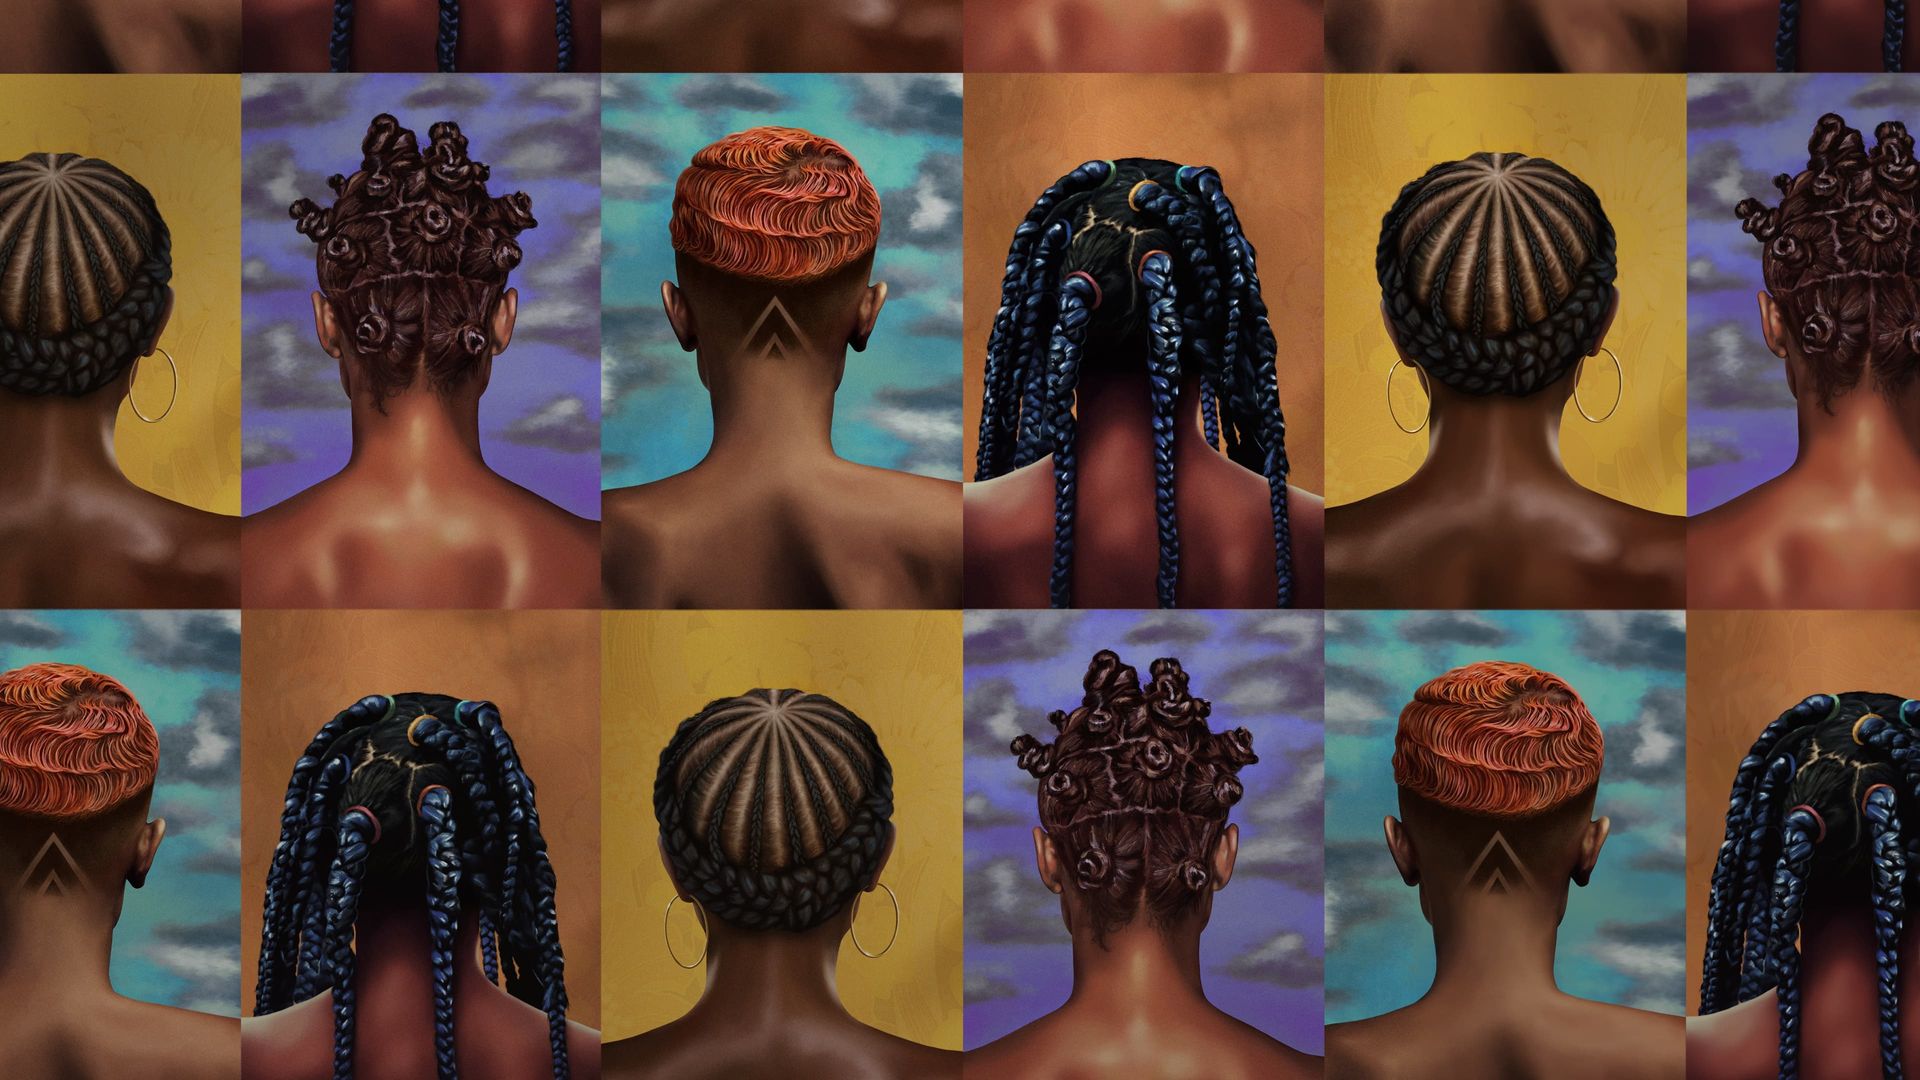 The Hair Tales background